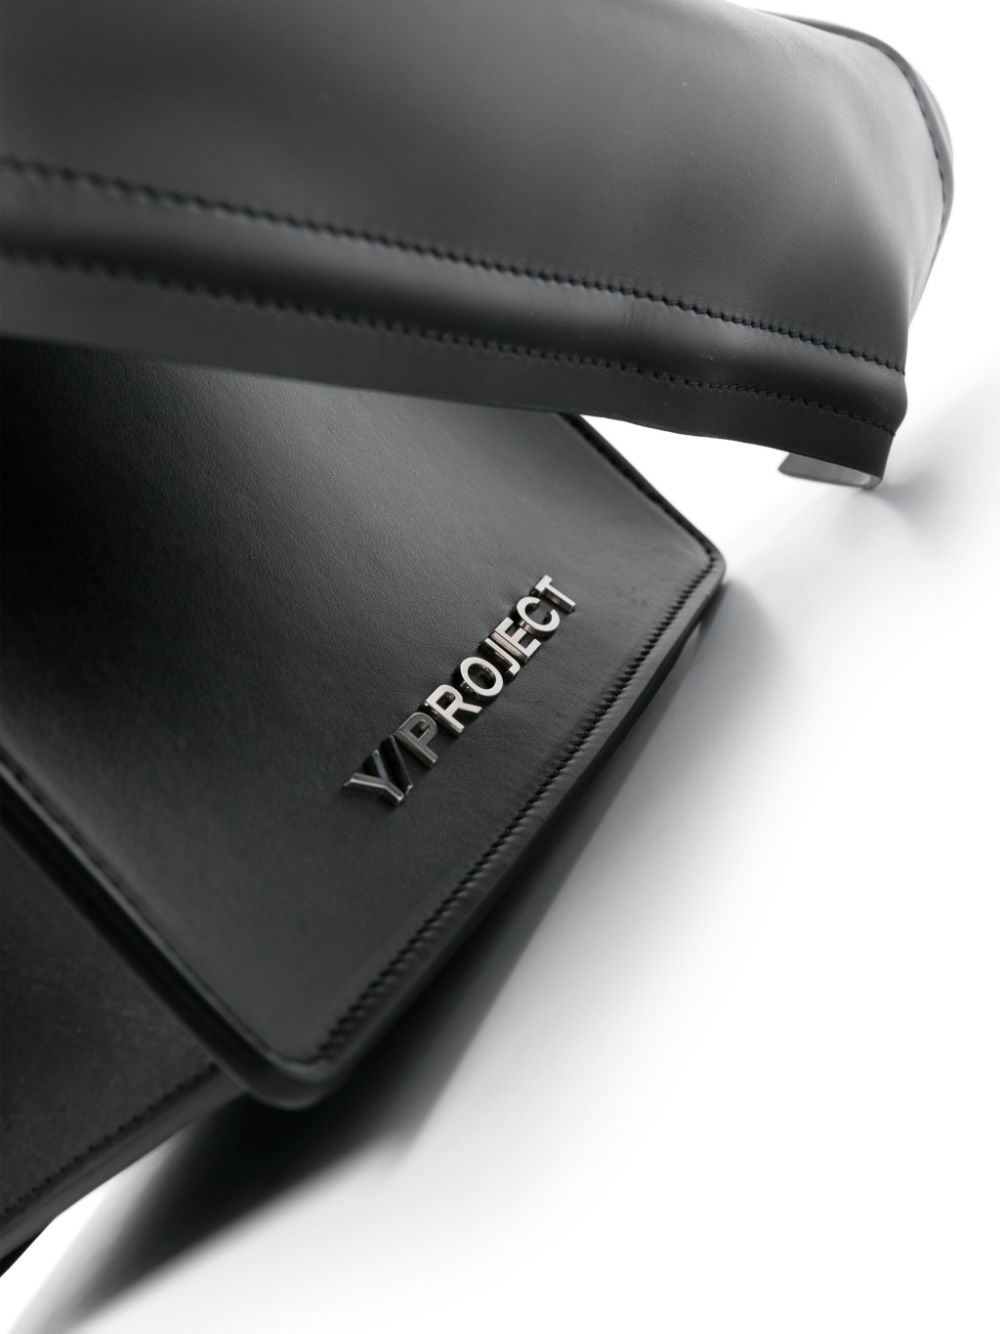 Y/PROJECT Black Leather Handbag with Silver-Tone Logo Lettering